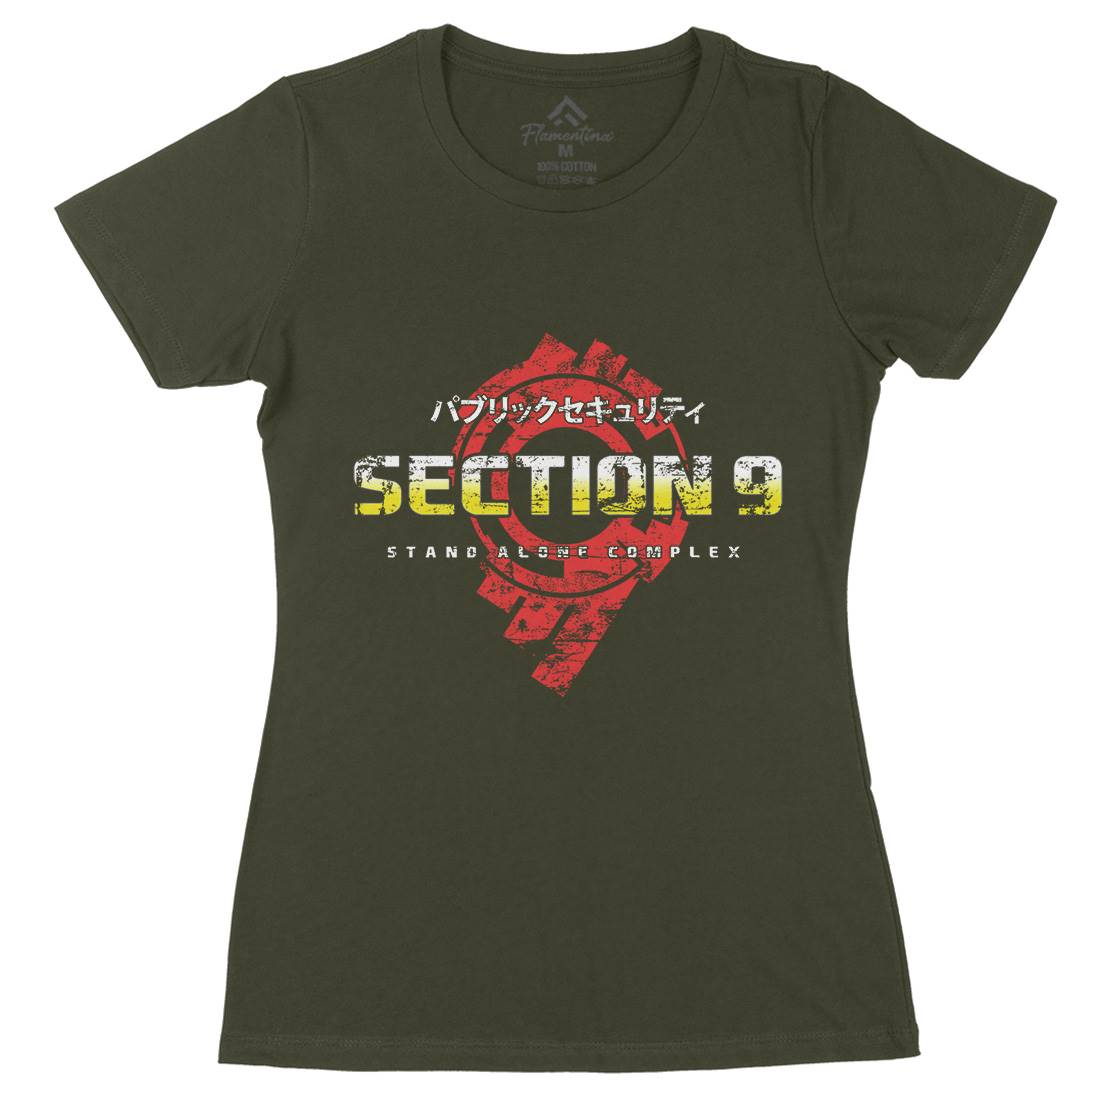 Section 9 Womens Organic Crew Neck T-Shirt Space D193